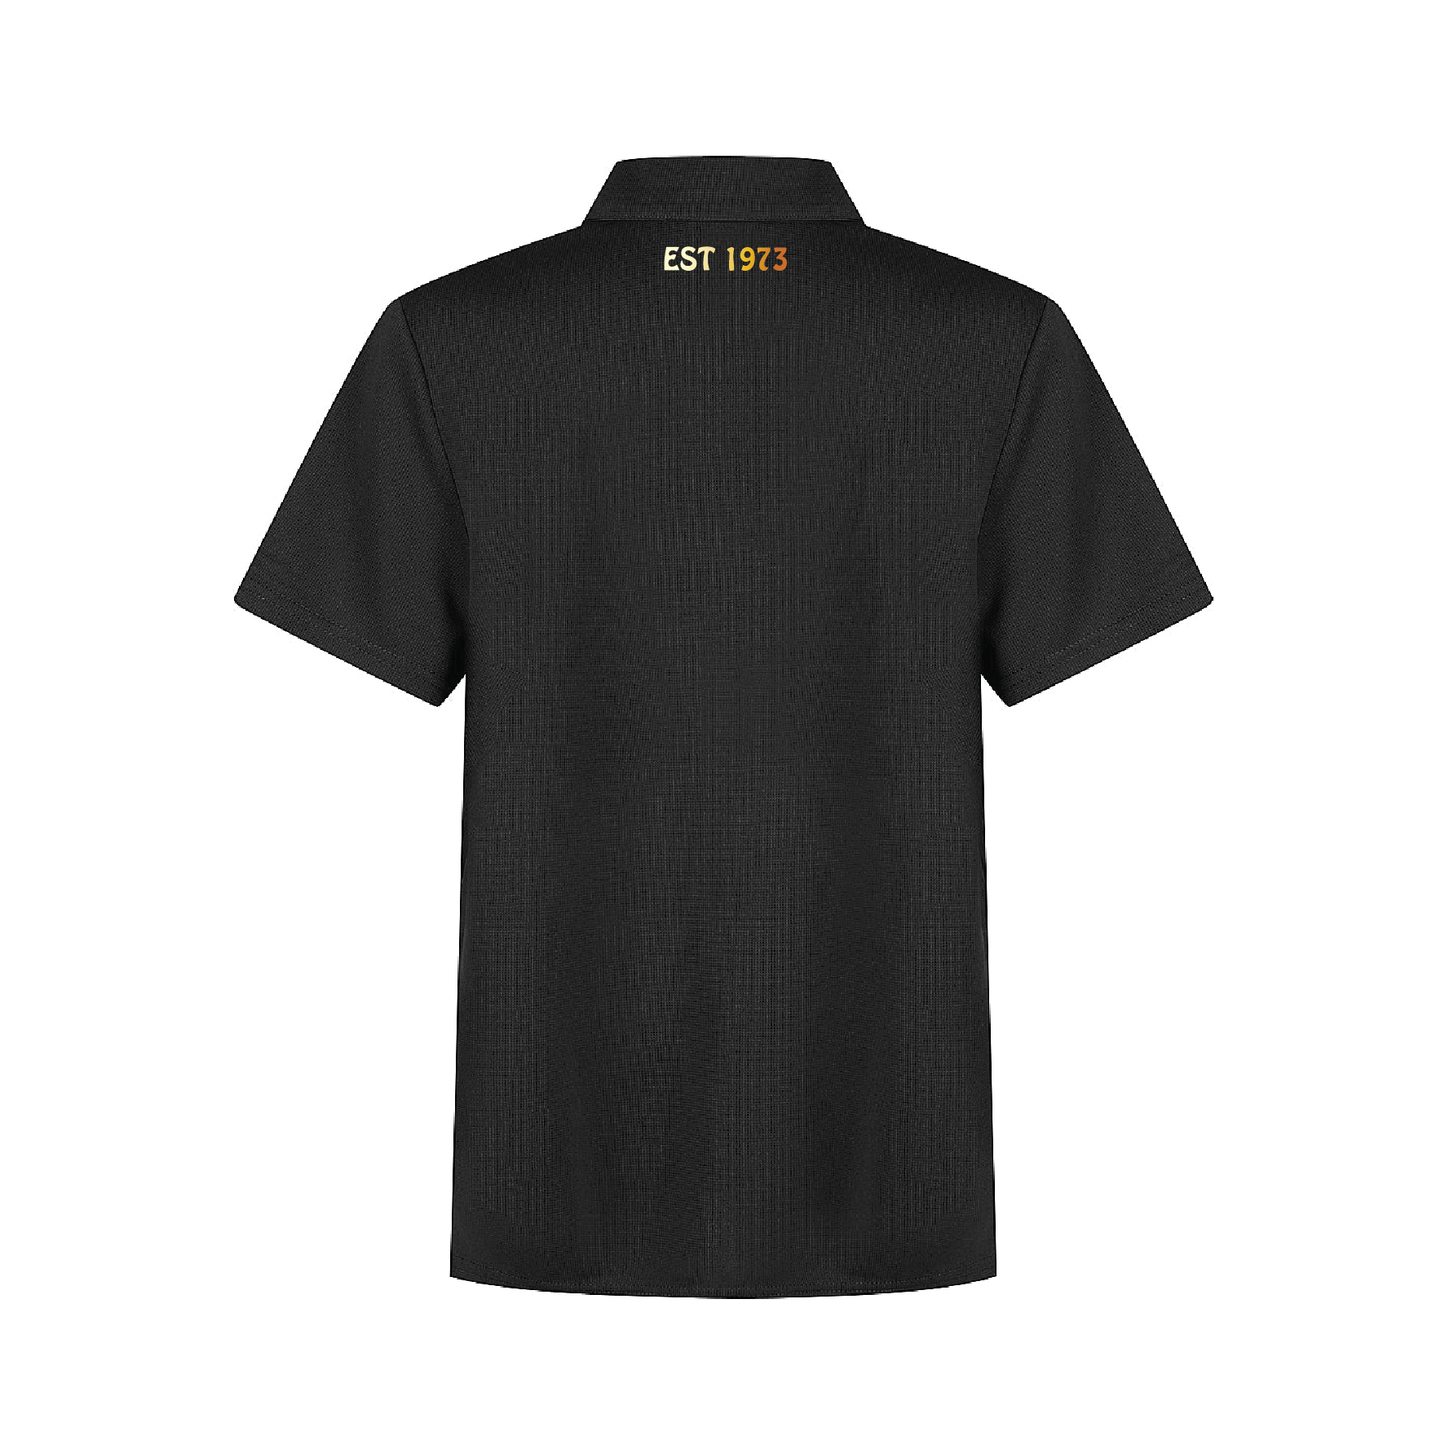 INGLE FARM SOCCER JUNIORS CLUB POLO SHIRT (ALLOW 1-2 WEEKS FOR DELIVERY)